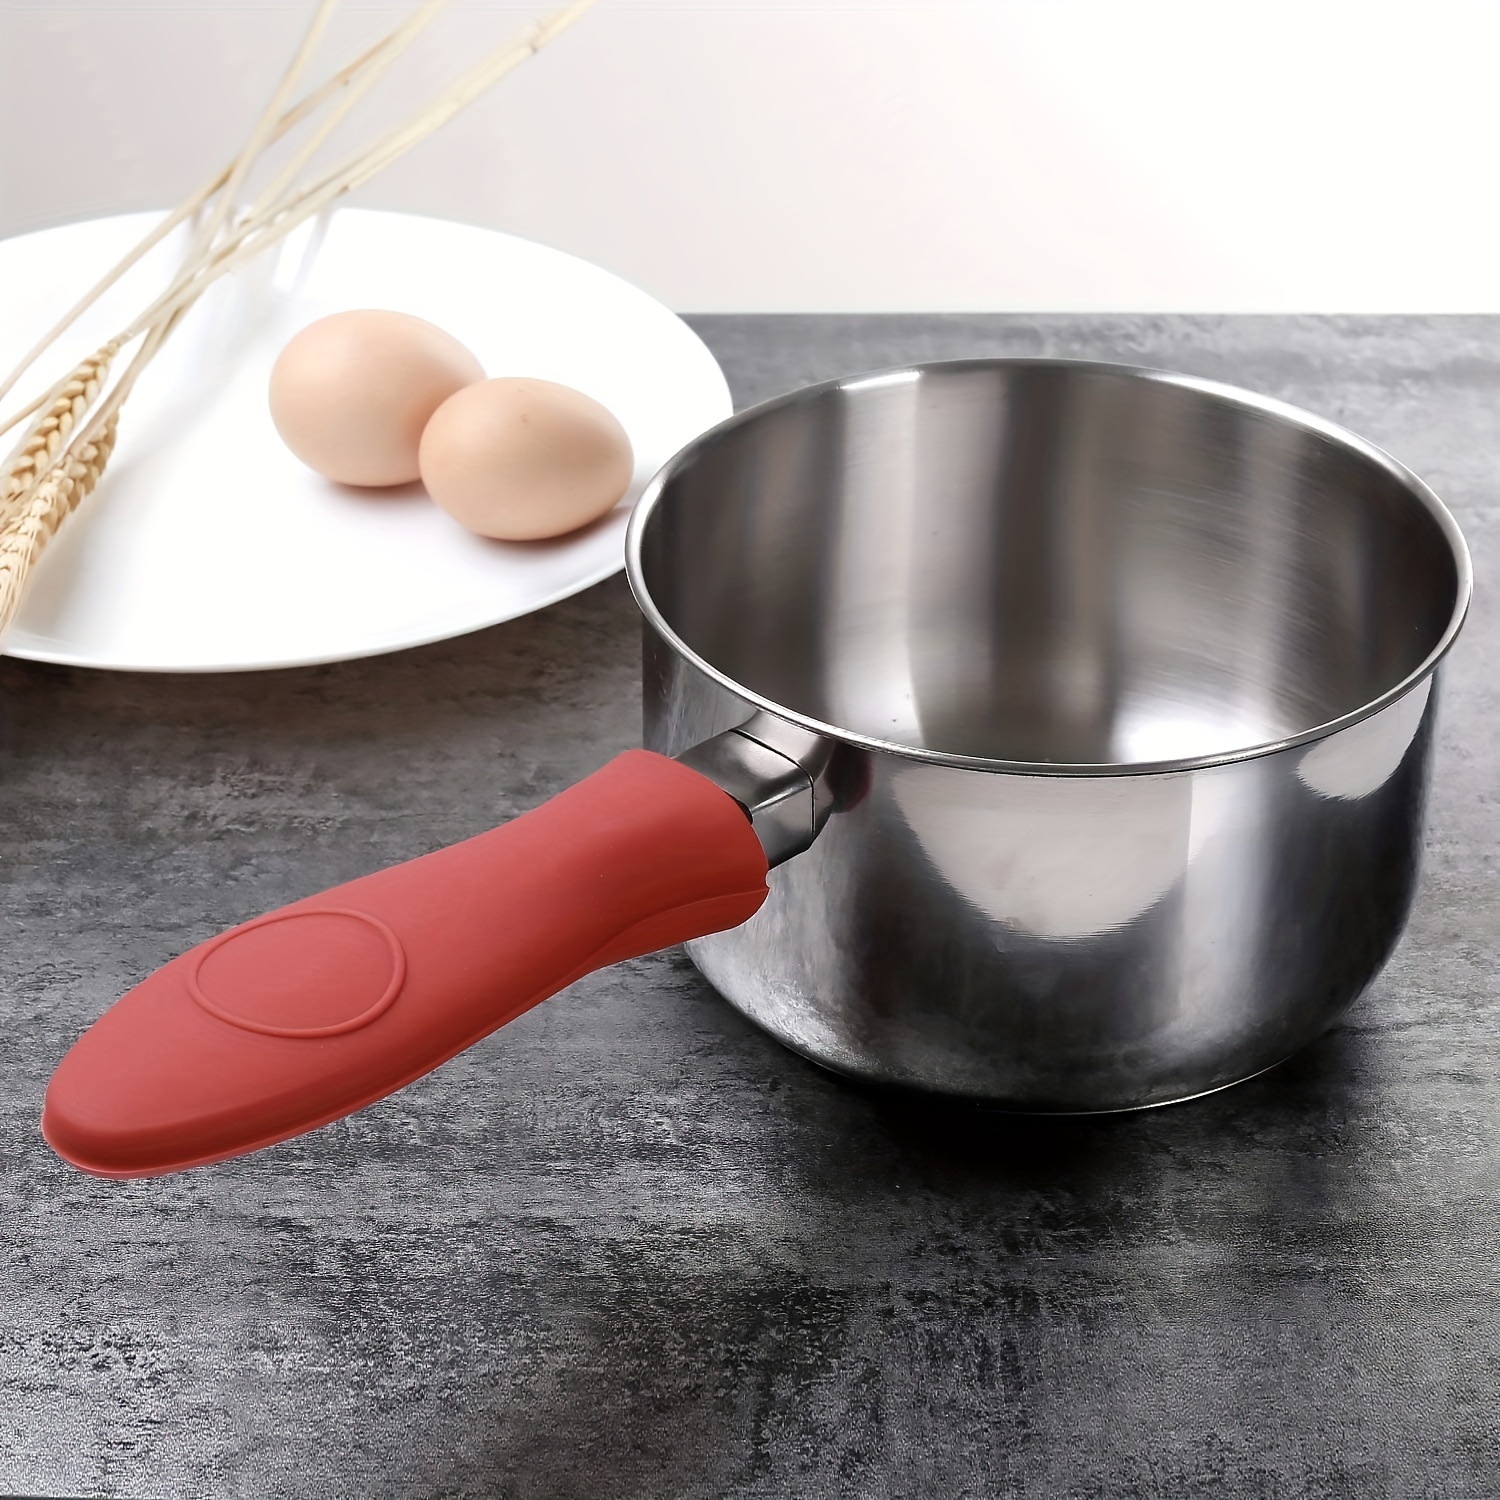 8 Pieces Silicone Hot Handle Holder and Assist Hot Pan Handle Holder Cast  Iron Handle Cover Assist Handle Rubber Holder Heat Resistant Pot Sleeve  Grip